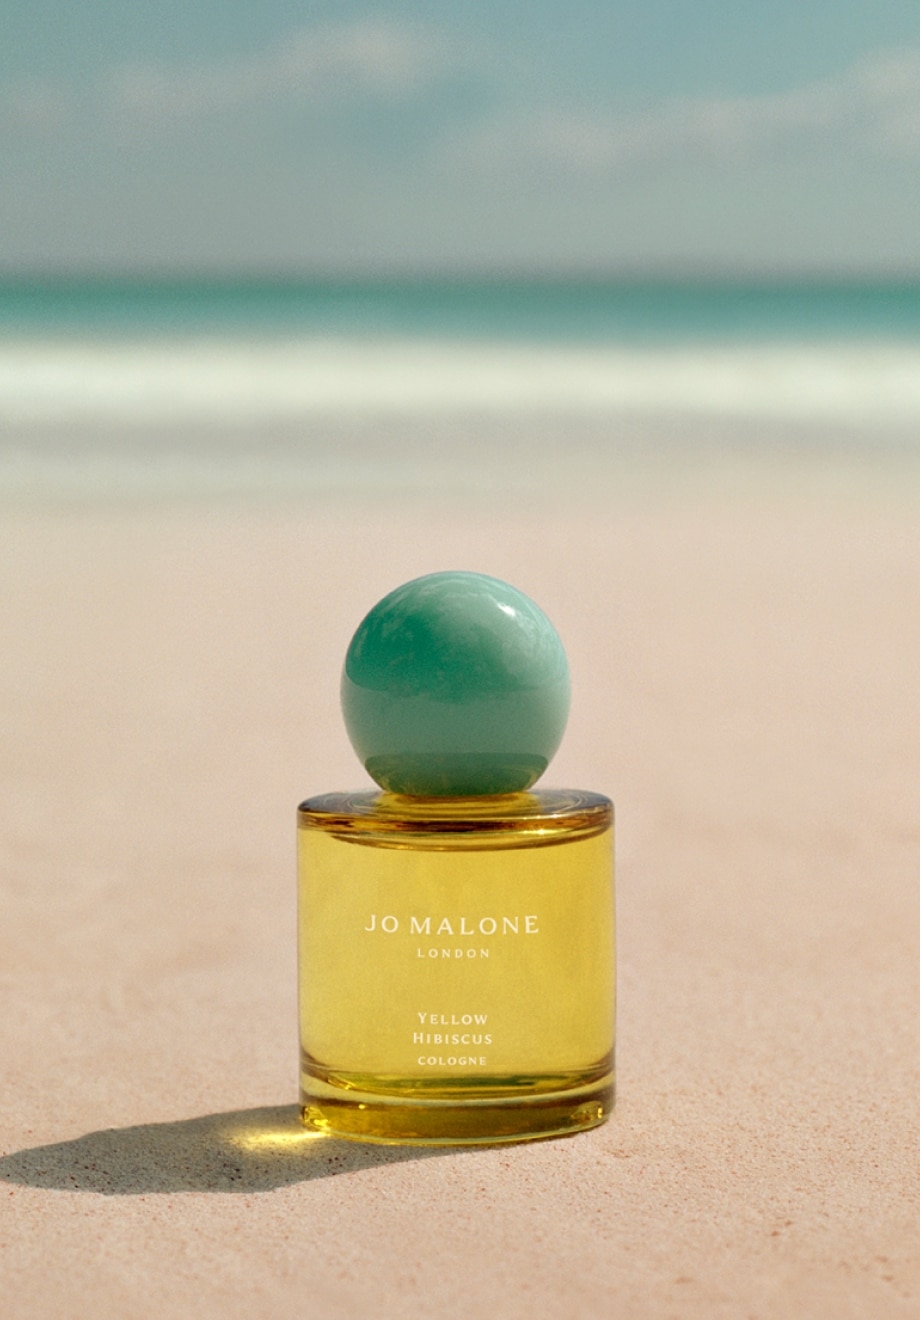 Jo Malone London Yellow Hibiscus cologne sat on a tropical beach. A clear yellow bottle with turquoise cap.